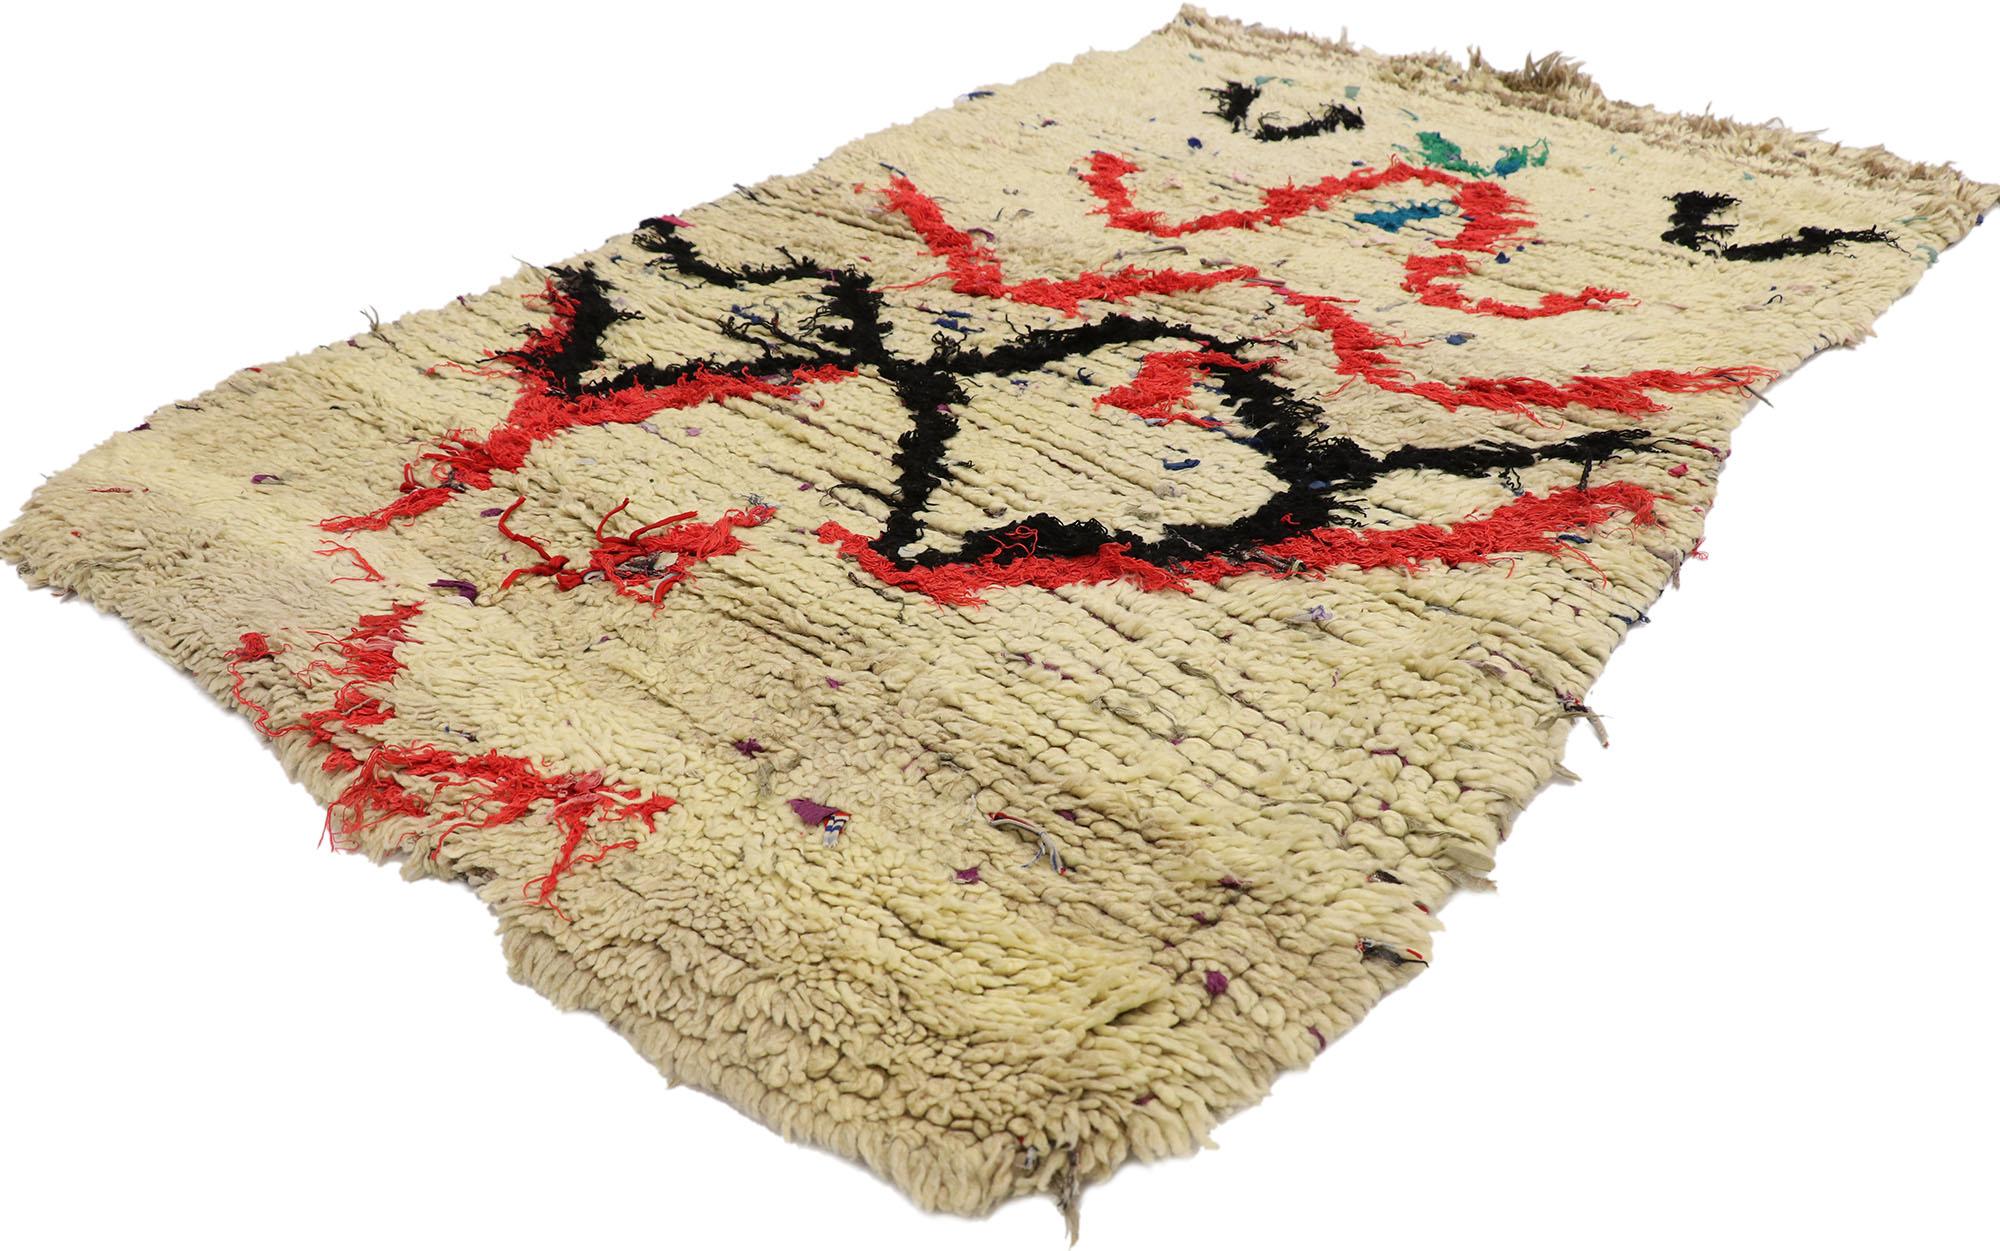 21532 vintage Berber Moroccan Boucherouite rug with Bohemian Tribal style 03'03 x 04'10. Showcasing an expressive tribal design, incredible detail and texture, this hand knotted cotton and wool vintage Berber Moroccan Boucherouite rug is a